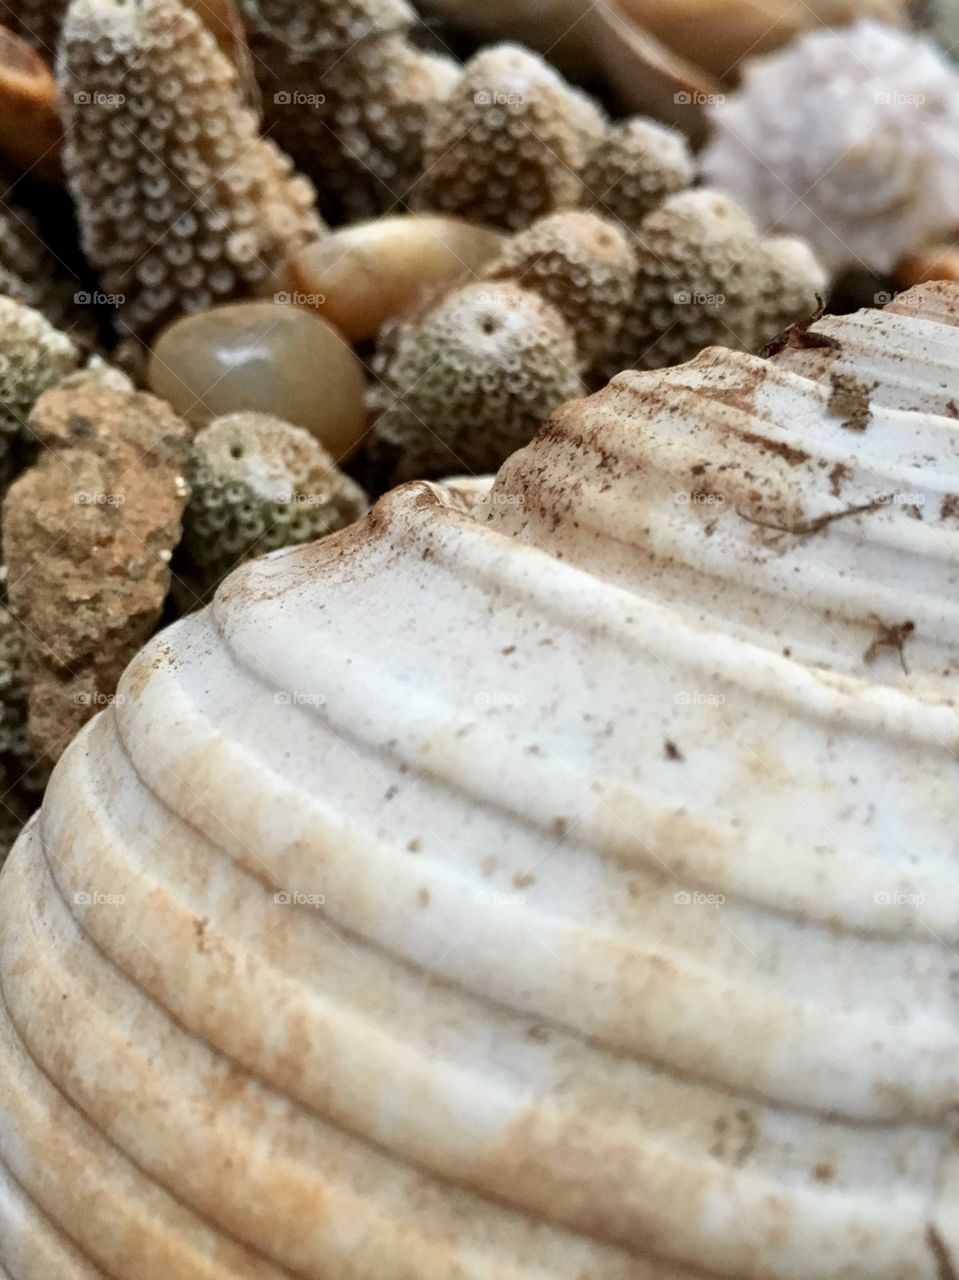 A close up of a large shell in some coral